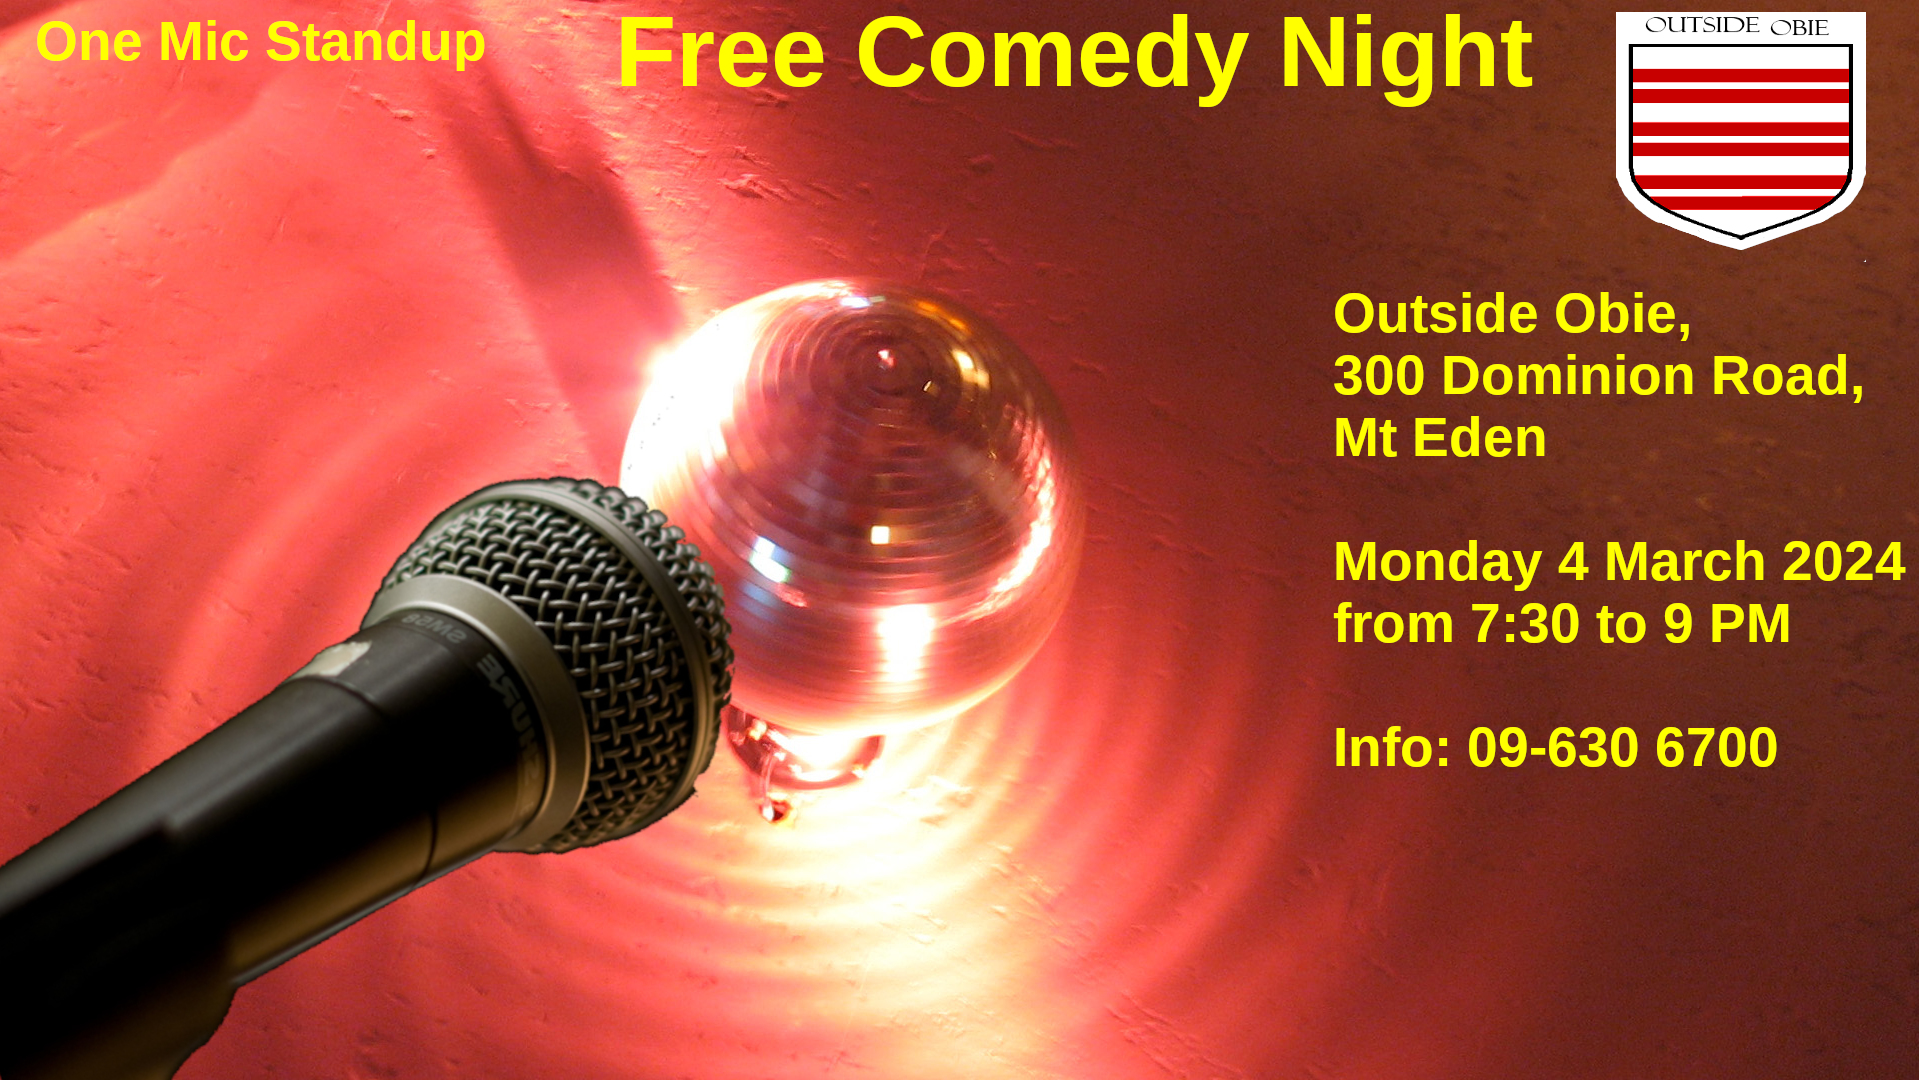 A microphone is held up to a mirror ball. Text: One Mic Standup Free Comedy Night Outside Obie, 300 Dominion Road, Mt Eden Monday 4 March 2024 from 7:30 to 9 PM Info: 09-630 6700